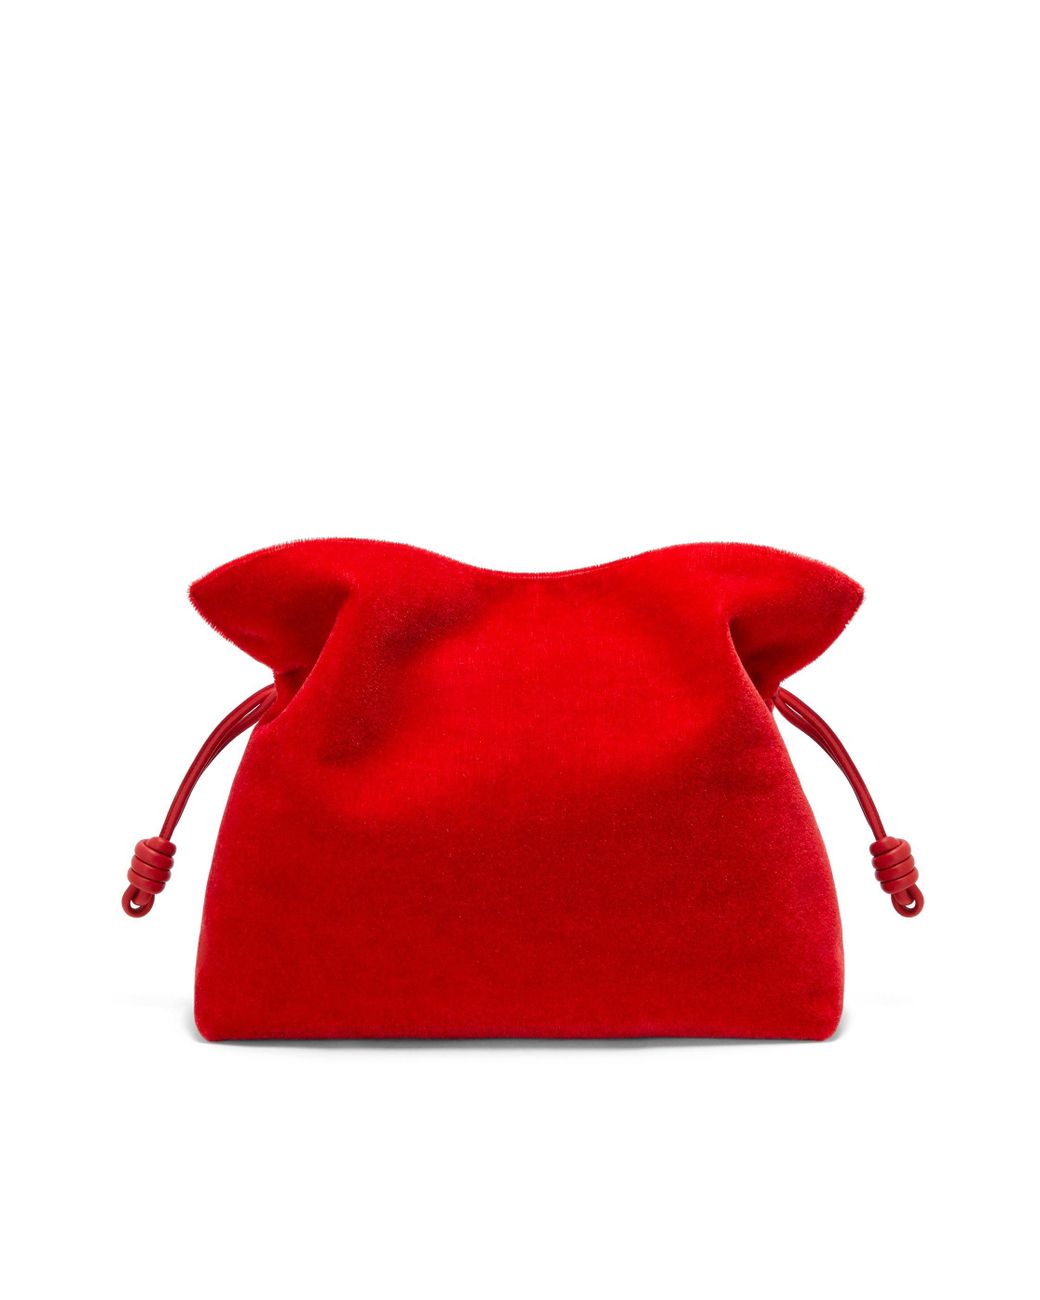 Loewe Luxury Xl Flamenco Bag In Mohair And Calfskin For Women in Red | Lyst